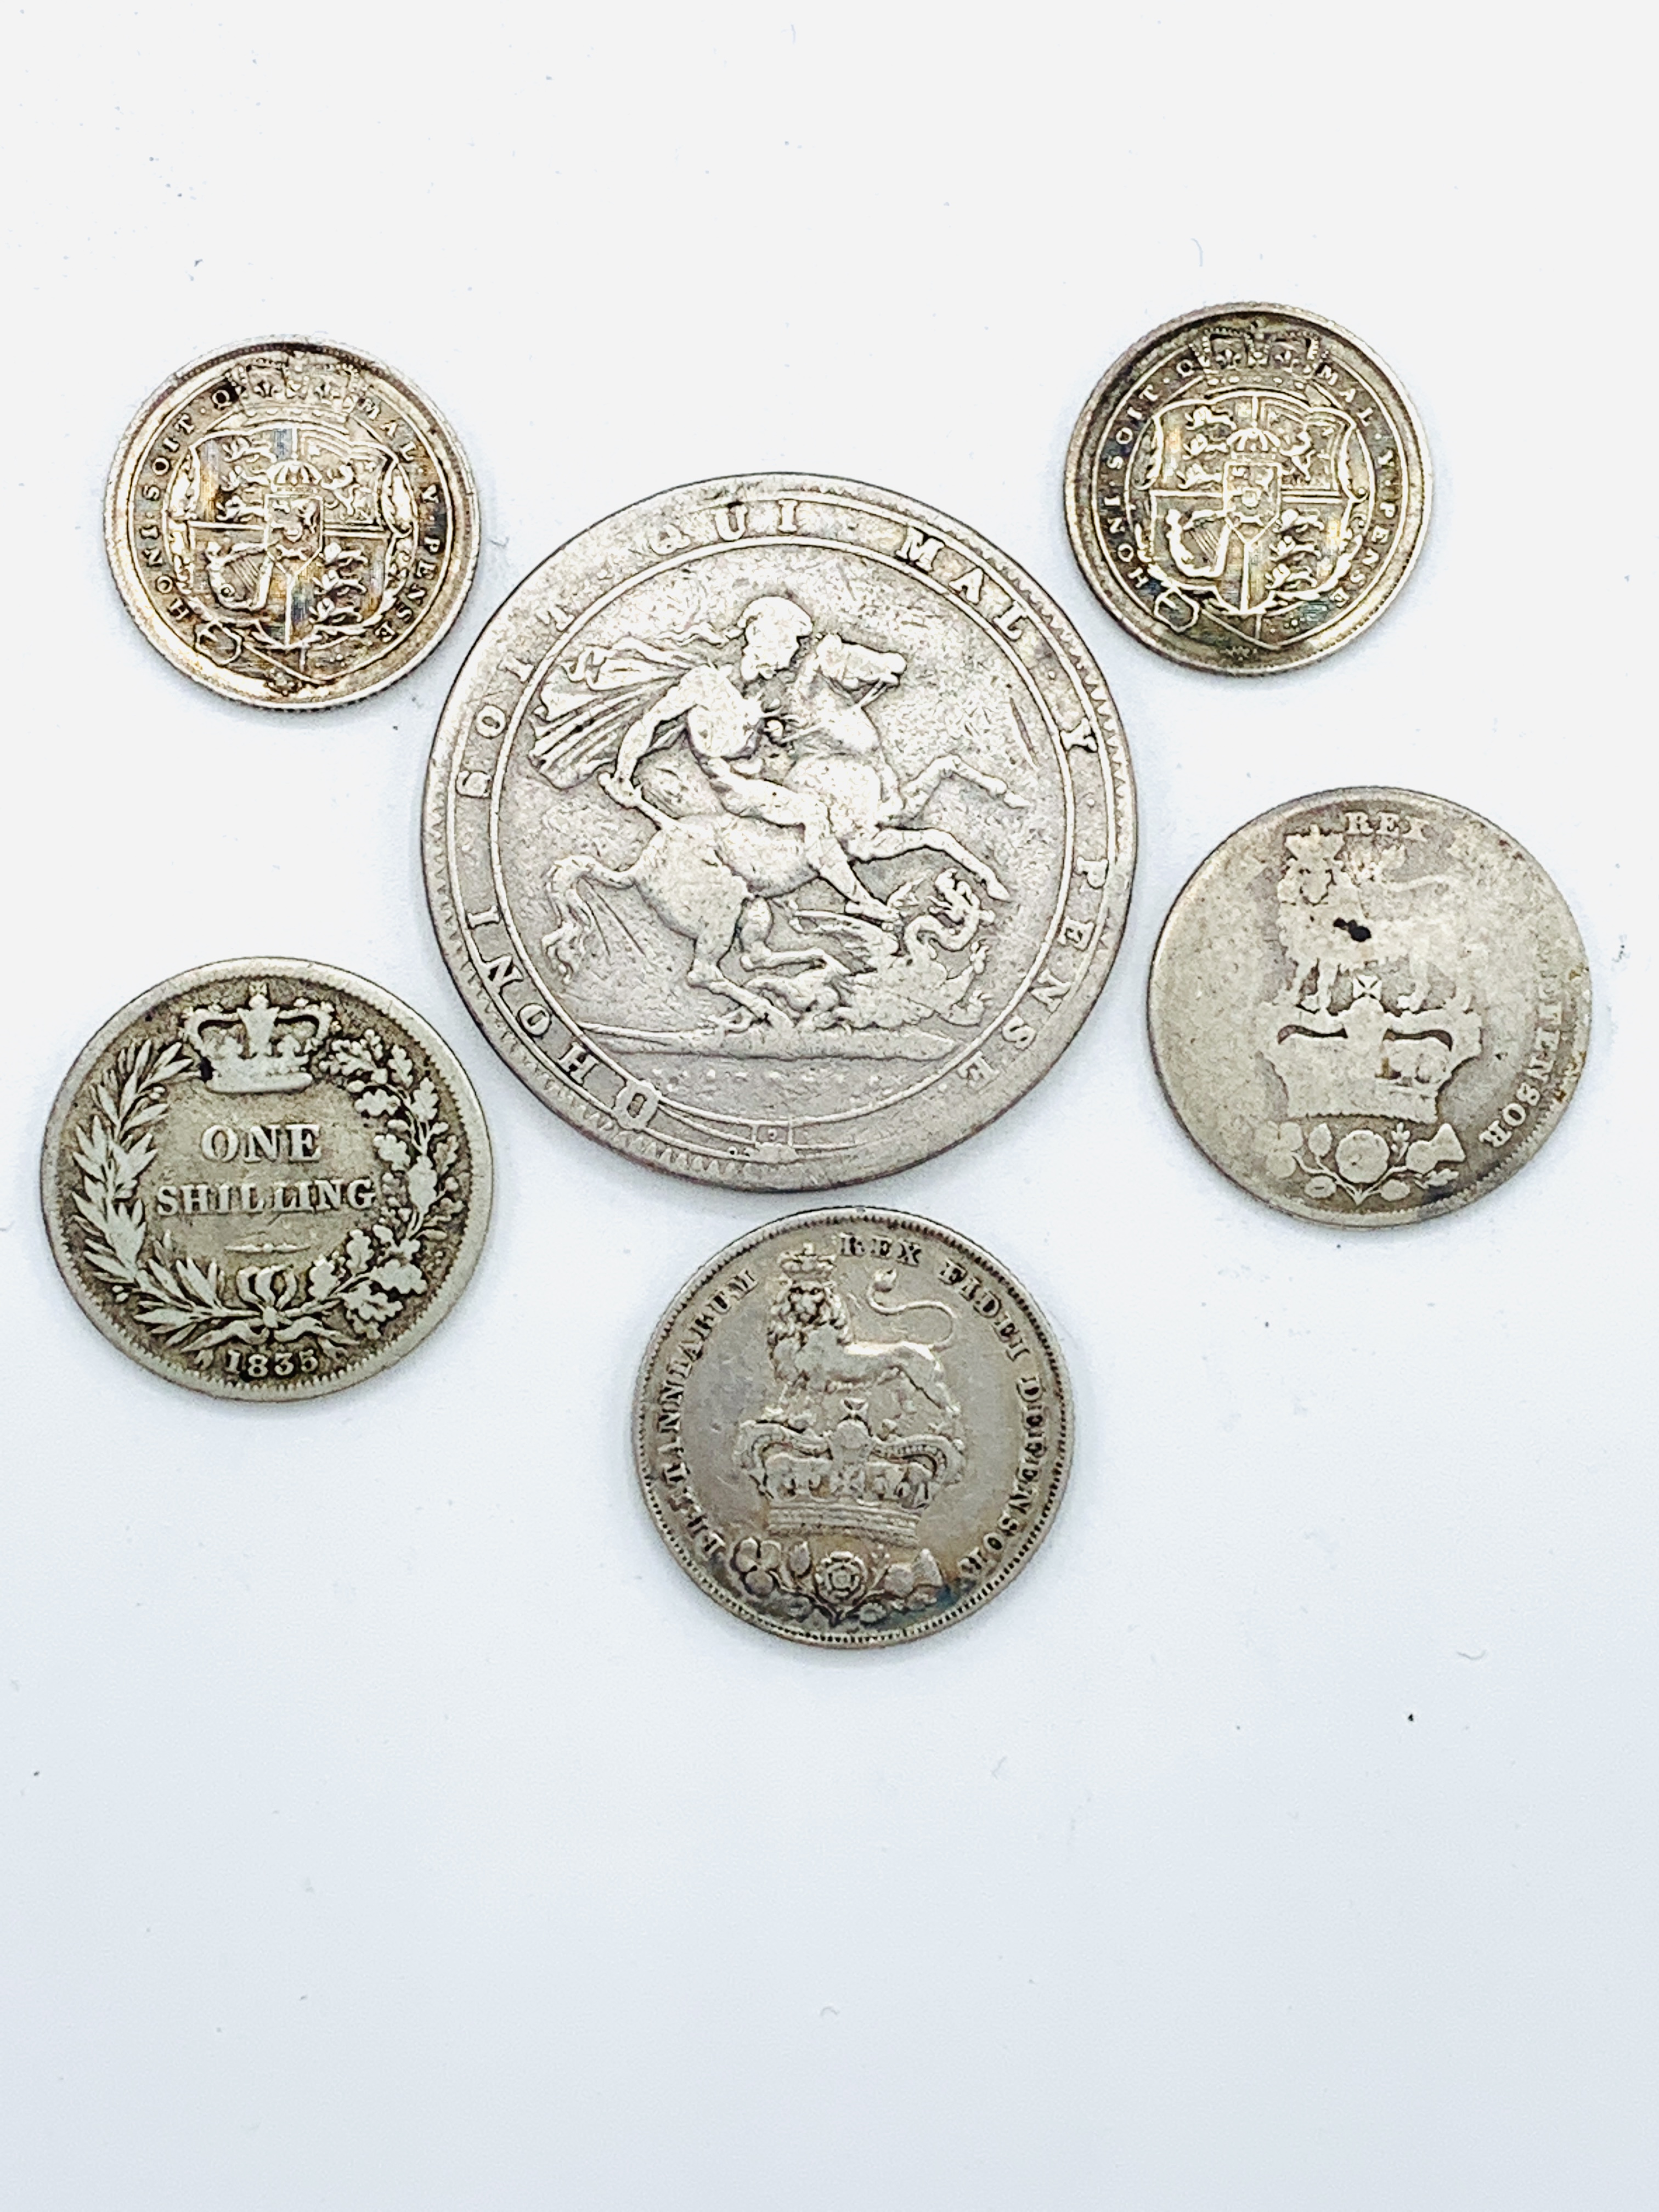 William III silver crown and half crown - Image 2 of 4